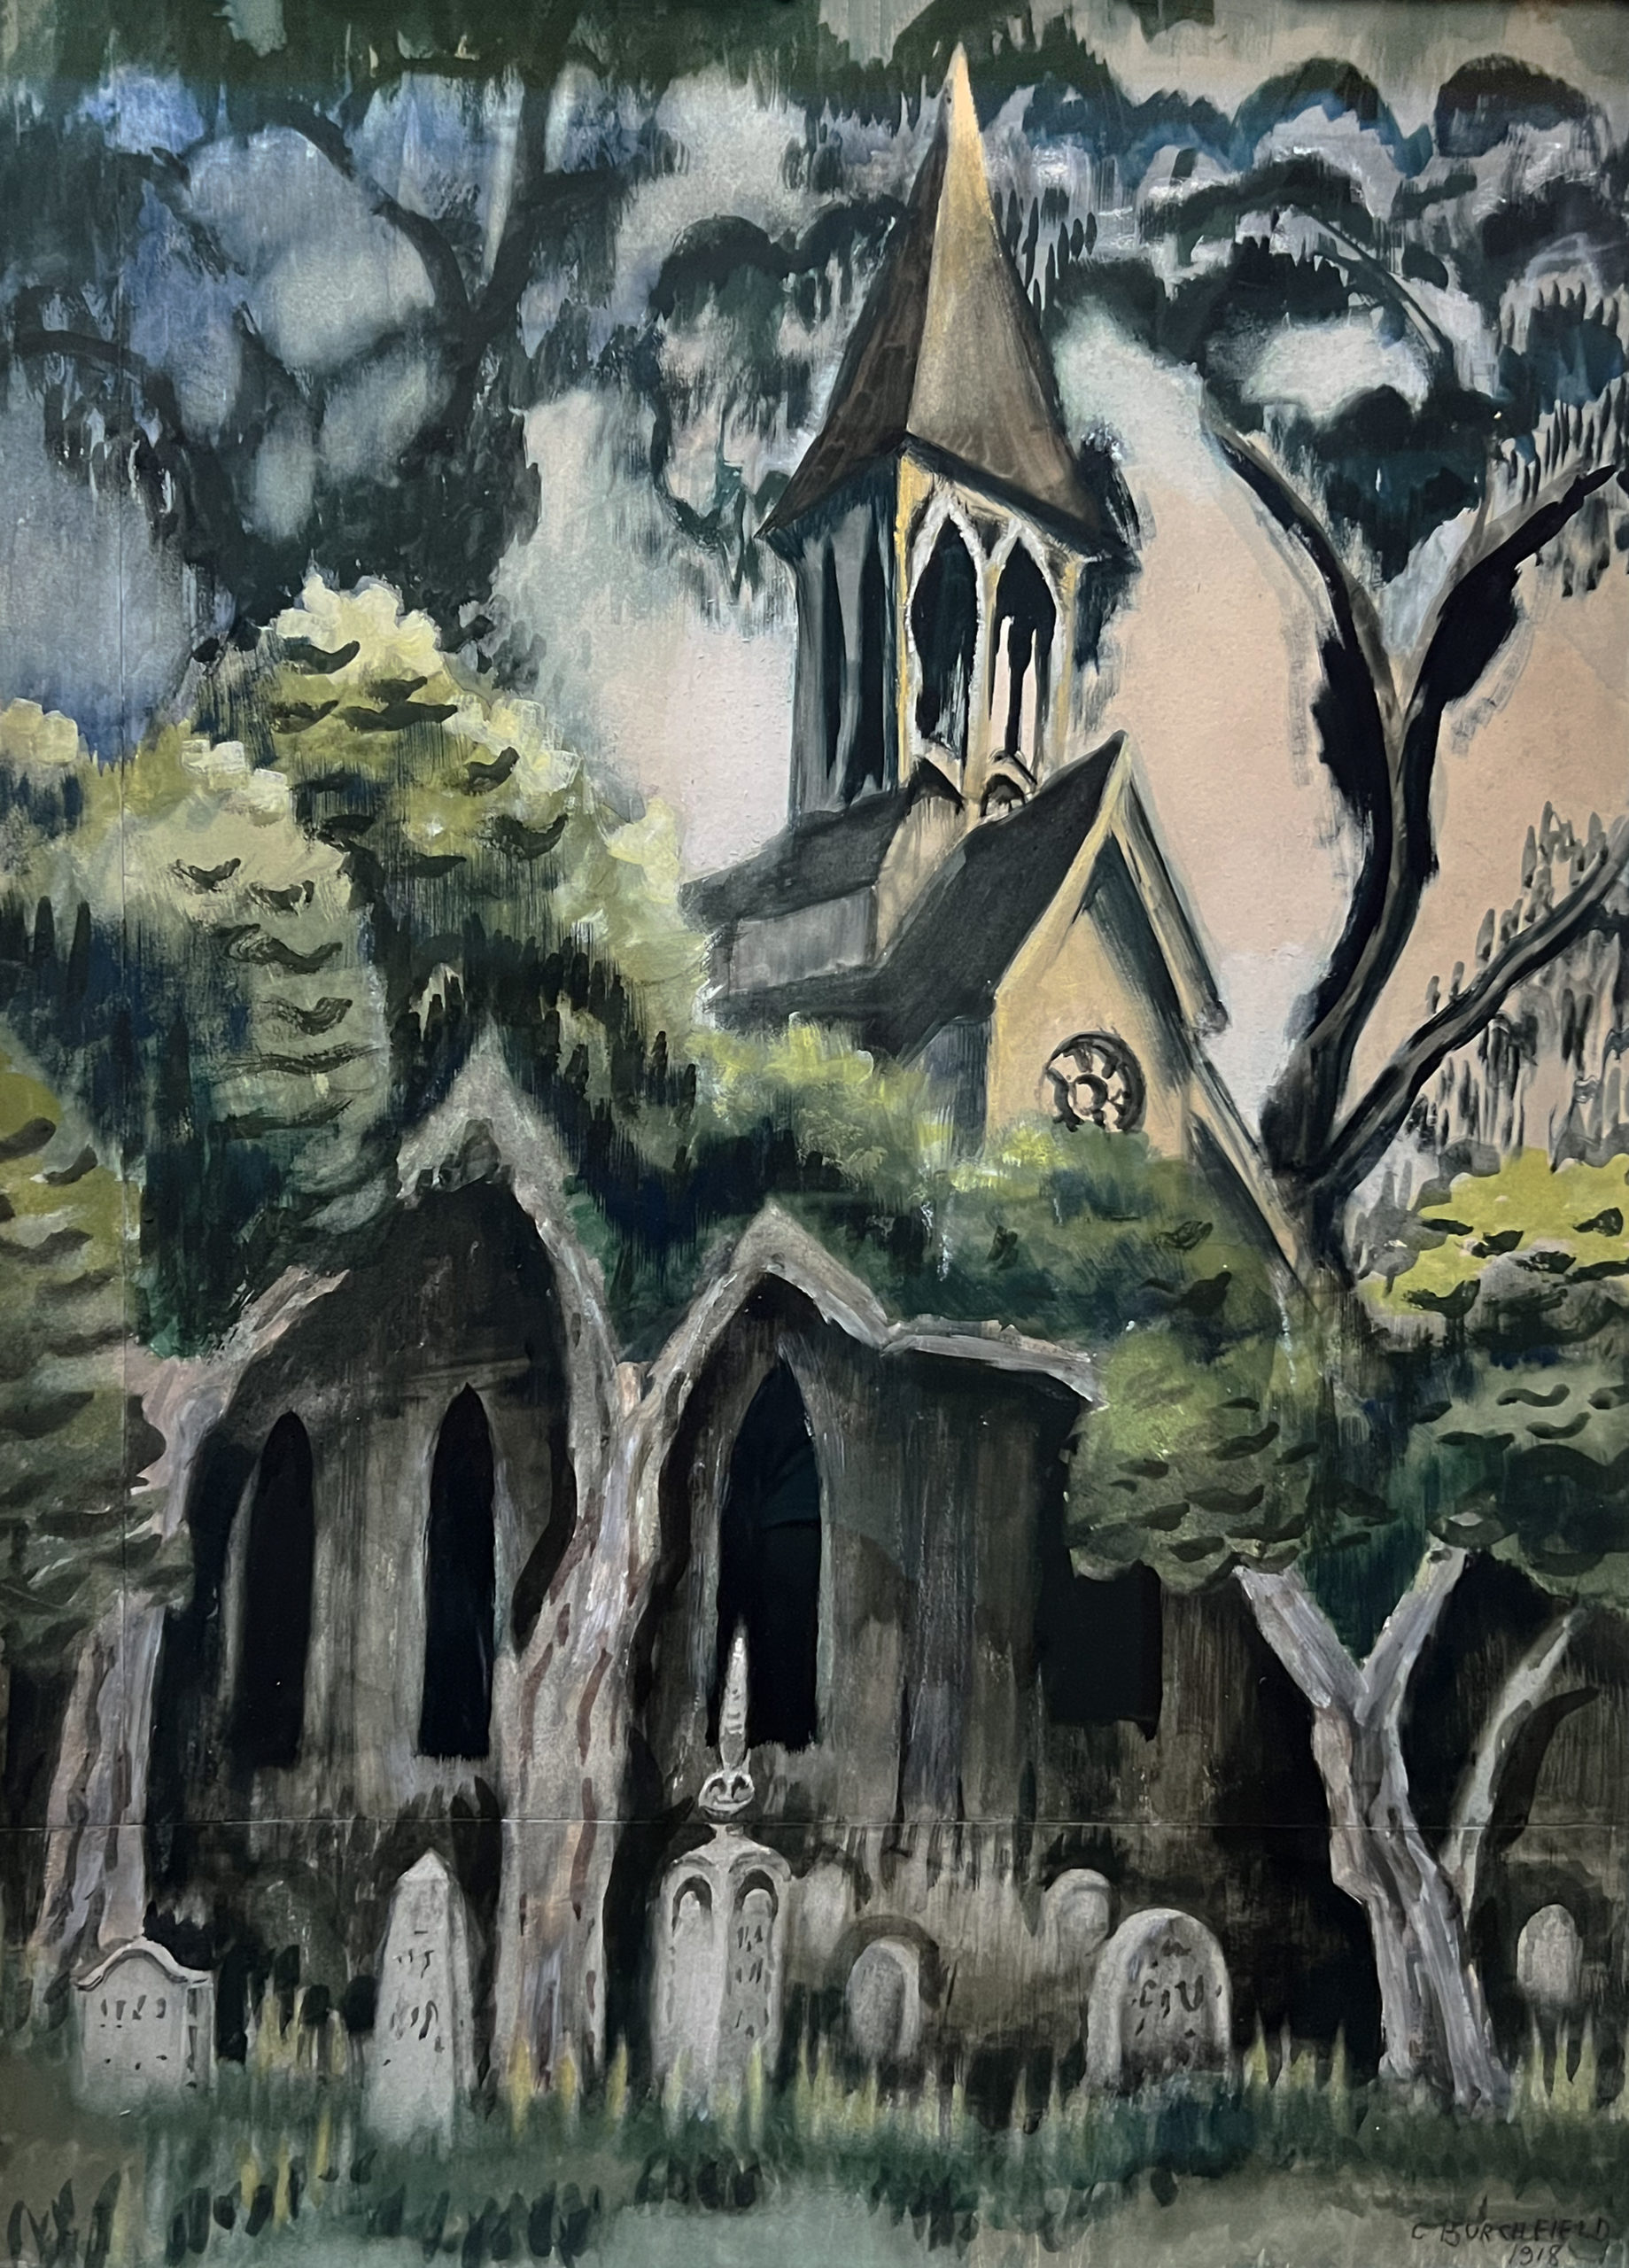 Visit A Gothic style church sits in the middle of the composition with three large windows. It is surrounded by gnarled green trees. In the foreground is a graveyard with tombstones